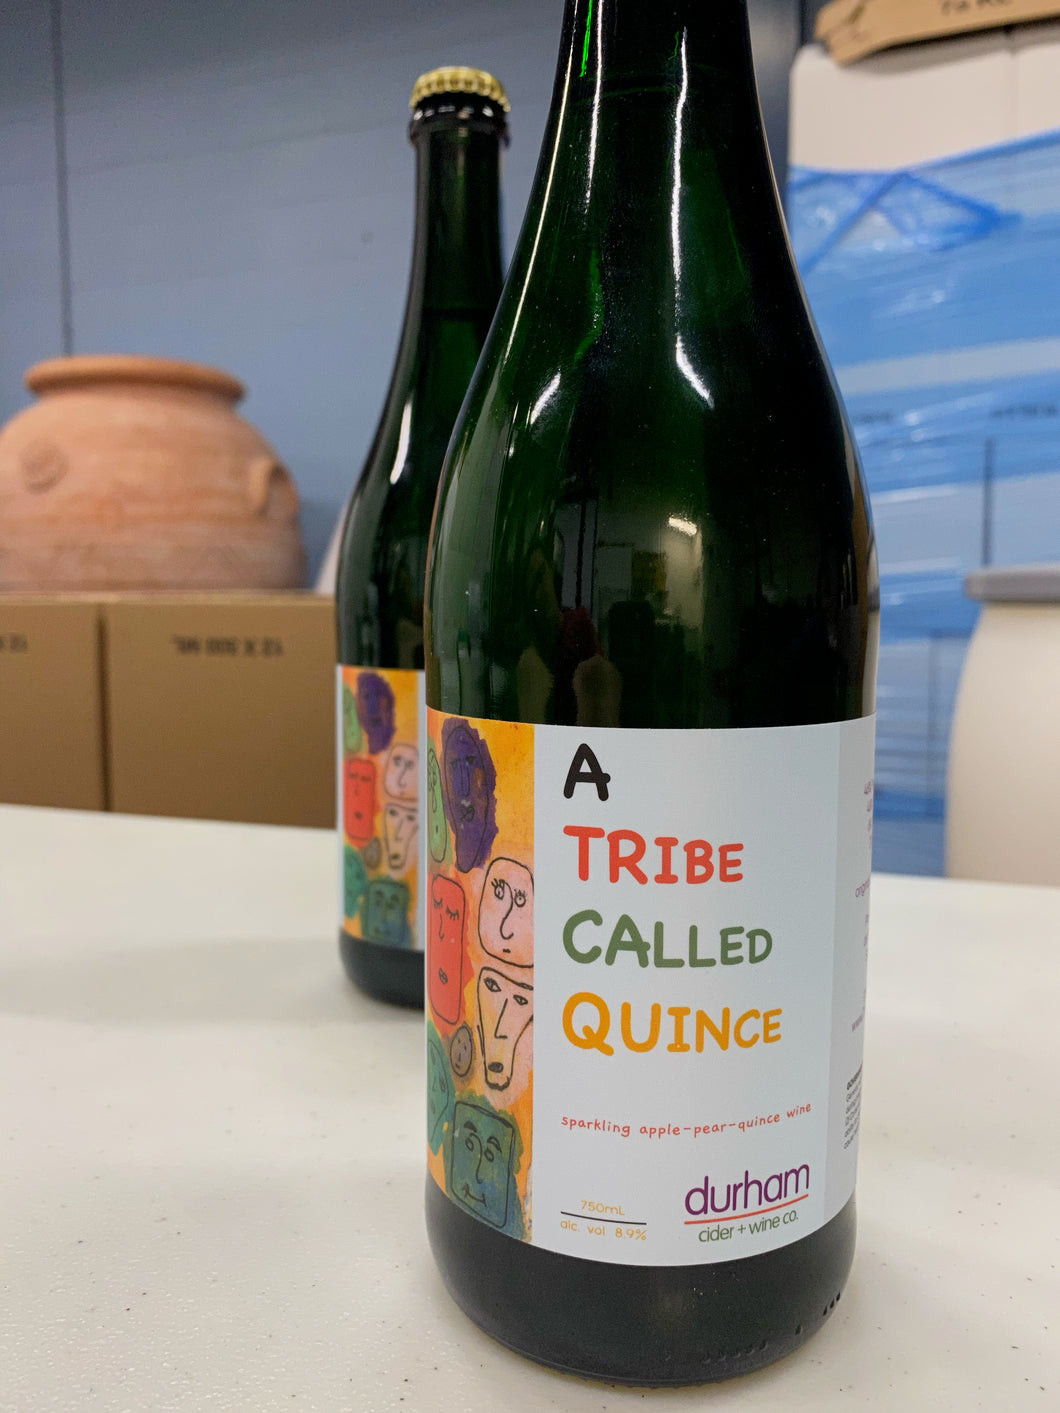 A Tribe Called Quince '19 (apple/pear/quince)